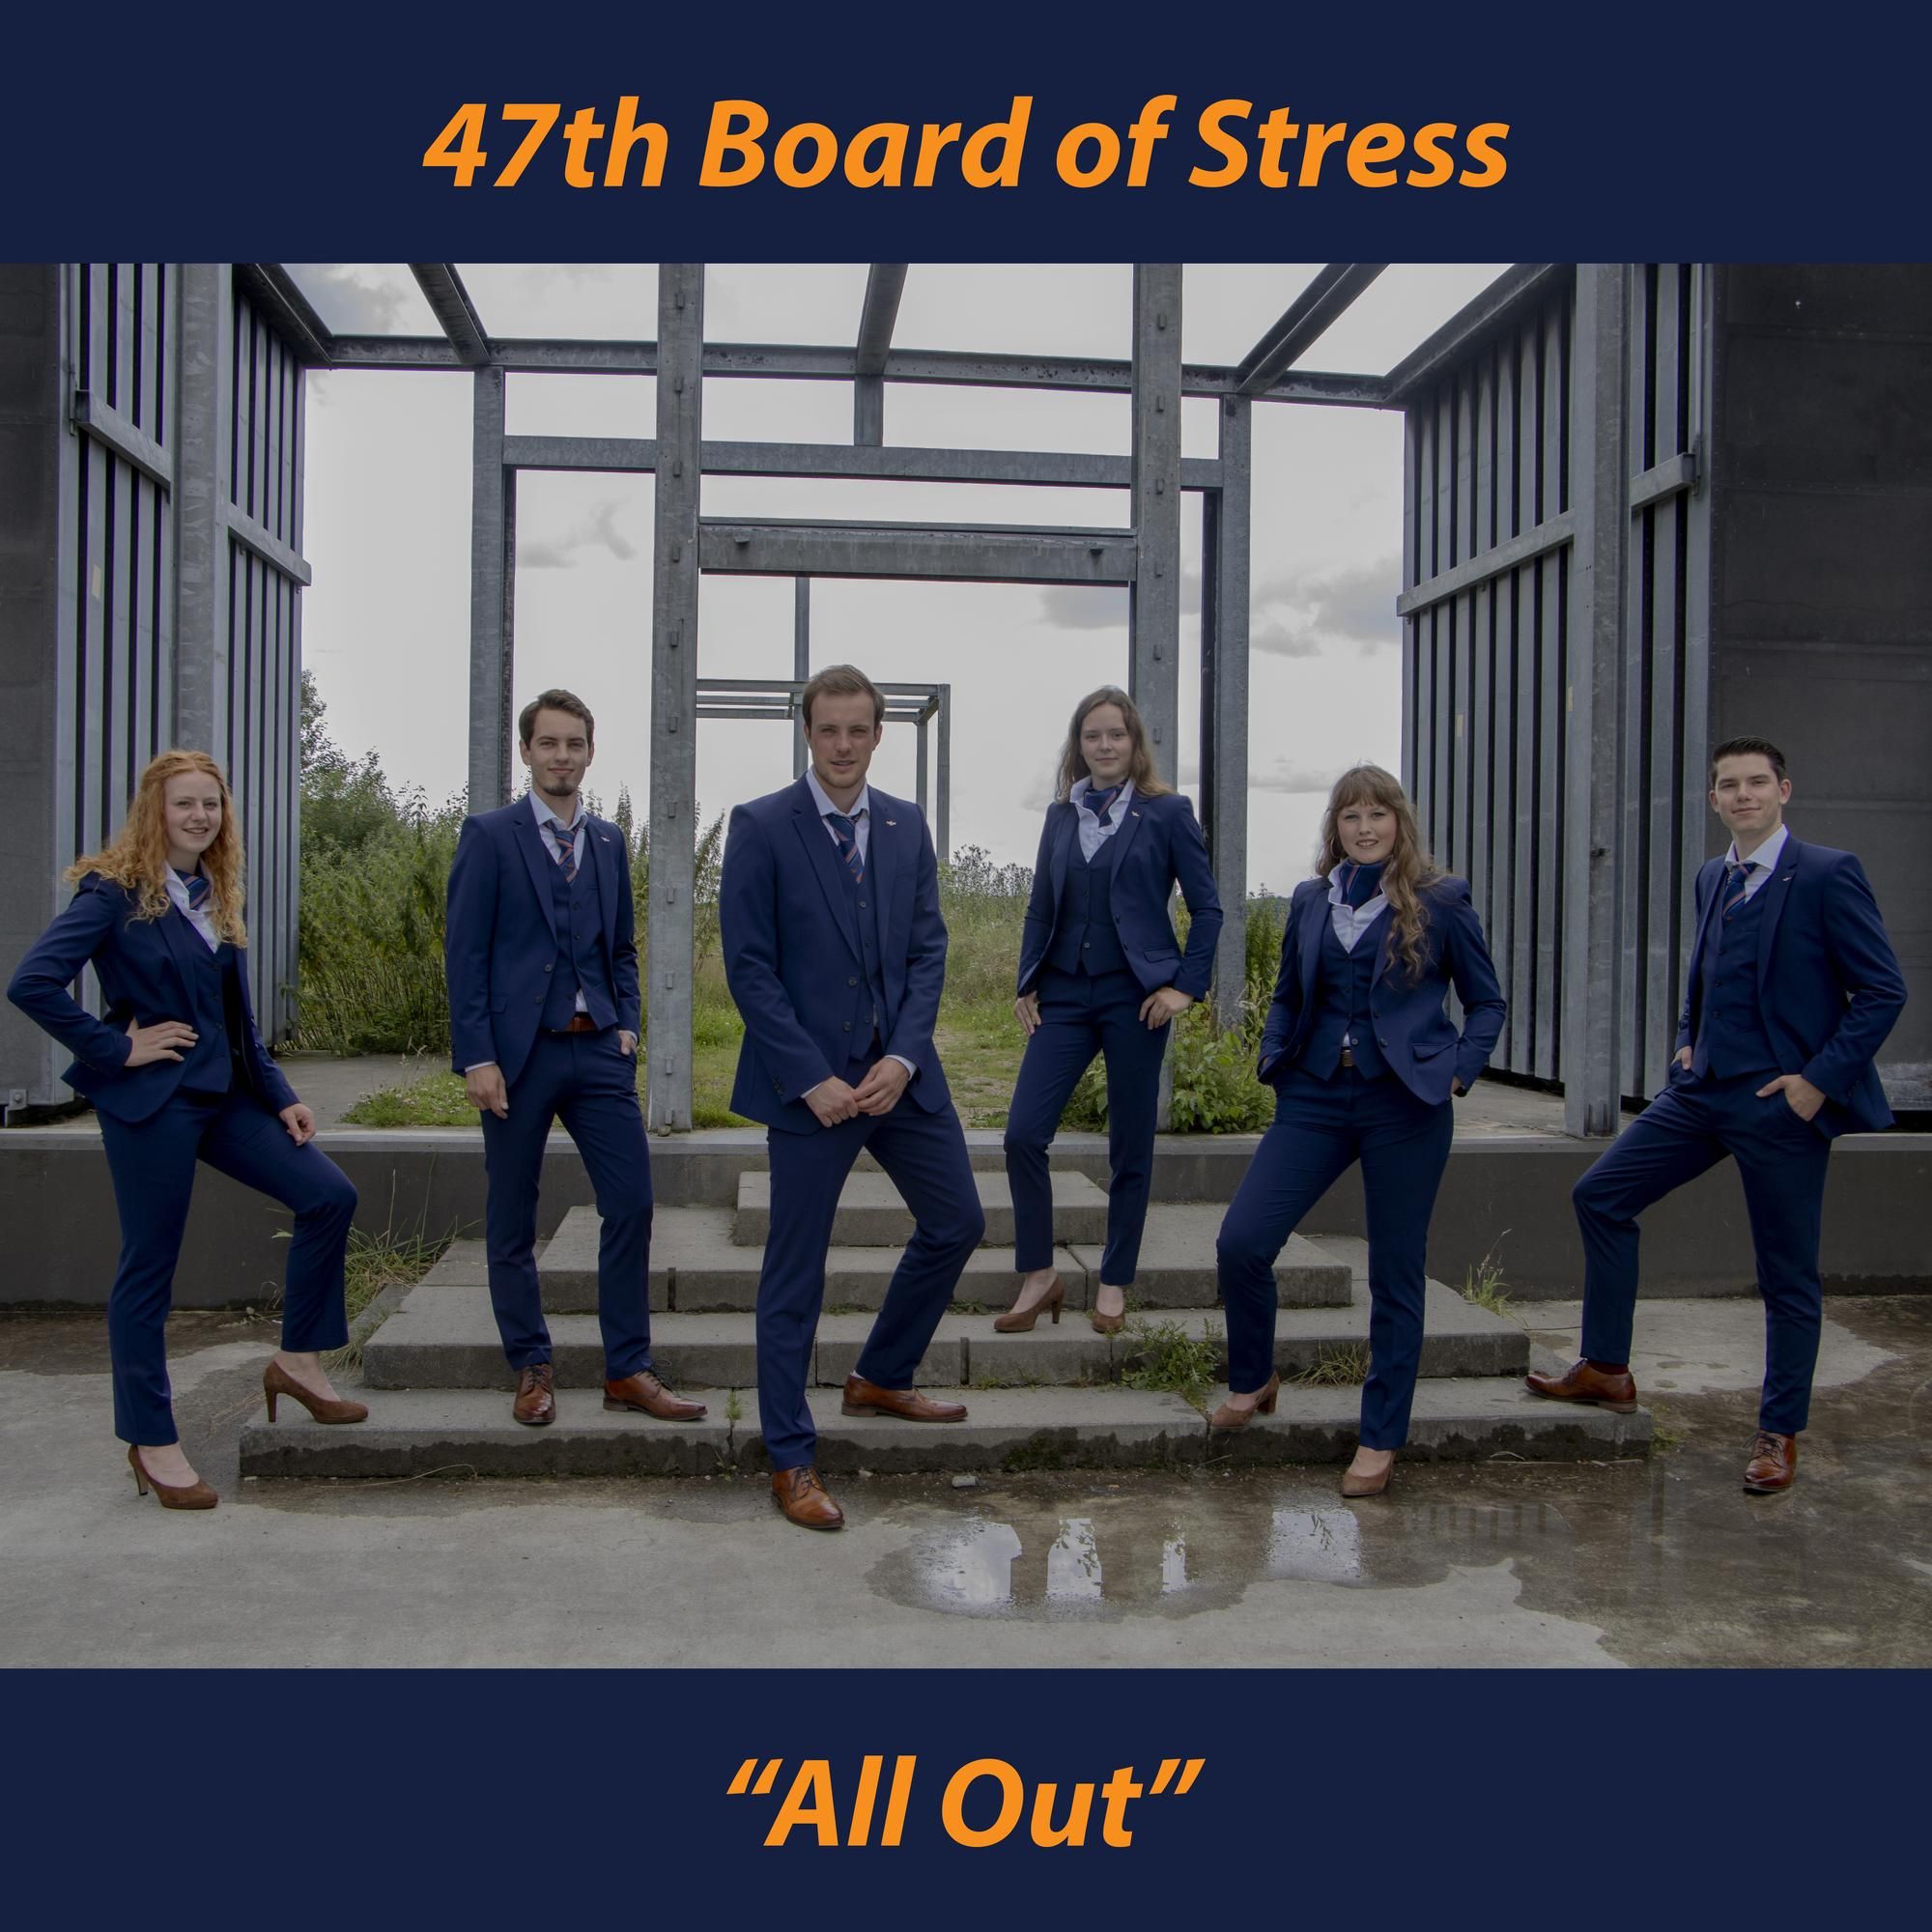 The 47th Board of Stress!!!